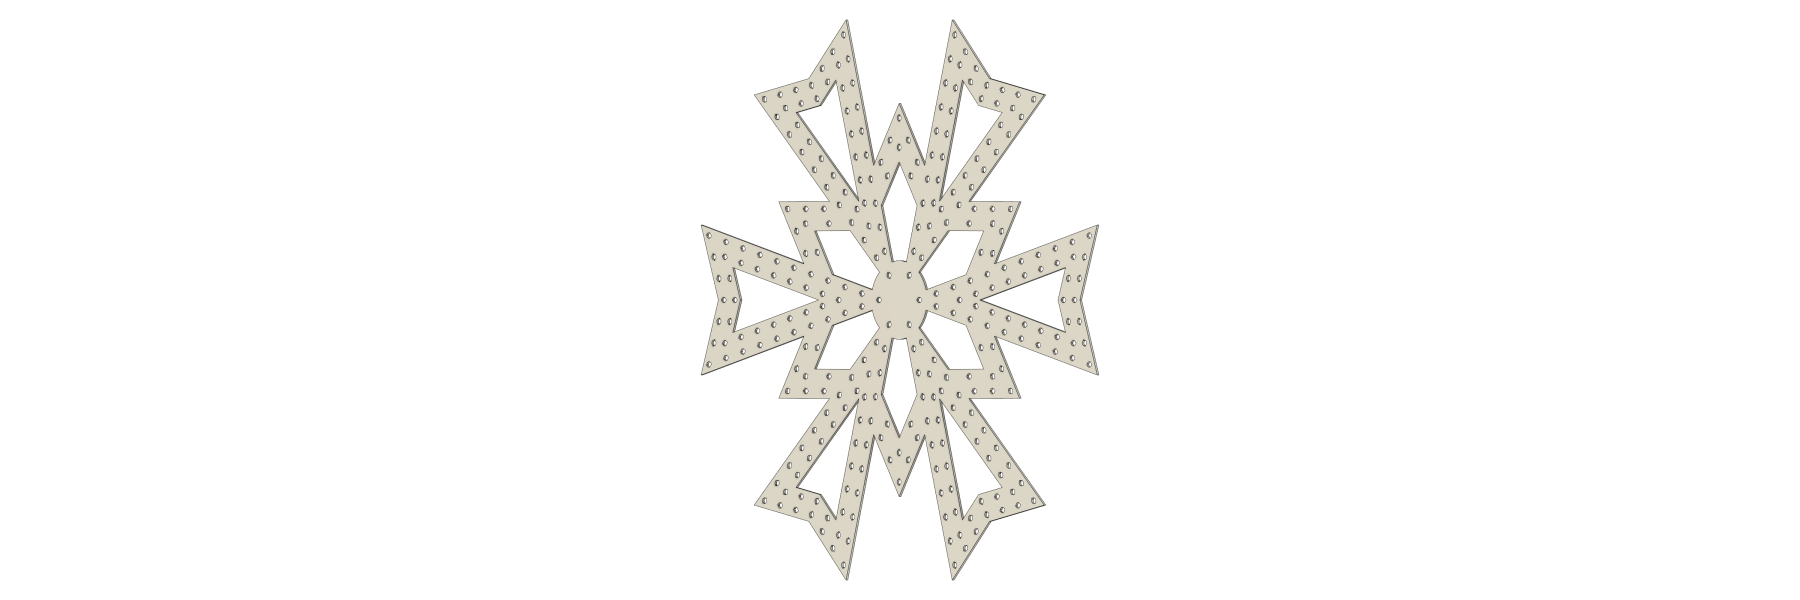   snowflakes  
 Christmas is associated with...